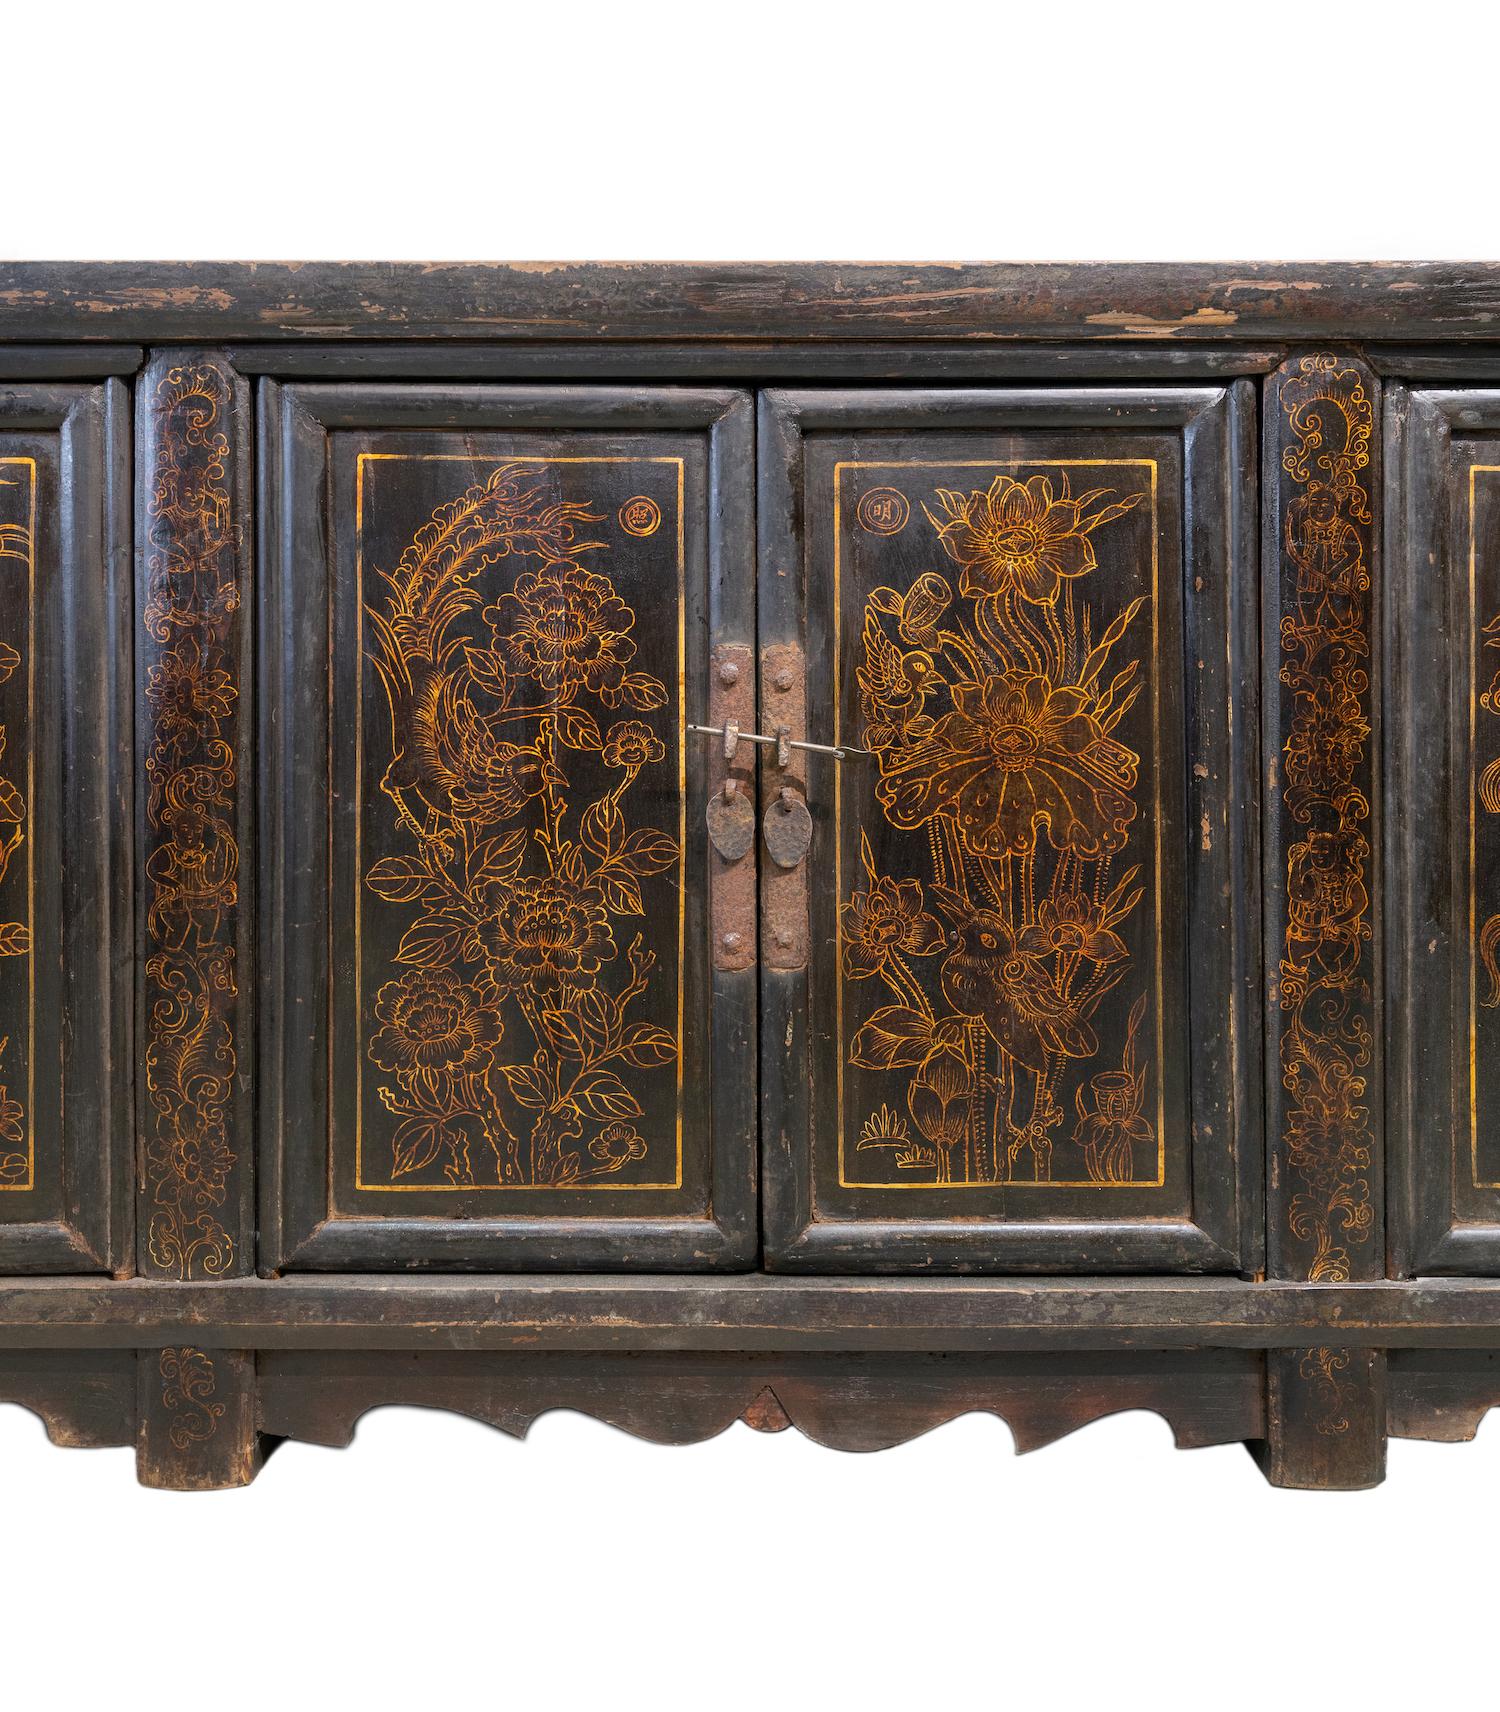 Hand-Painted Late 19th Century Long Black Lacquered Sideboard from Shanxi, China